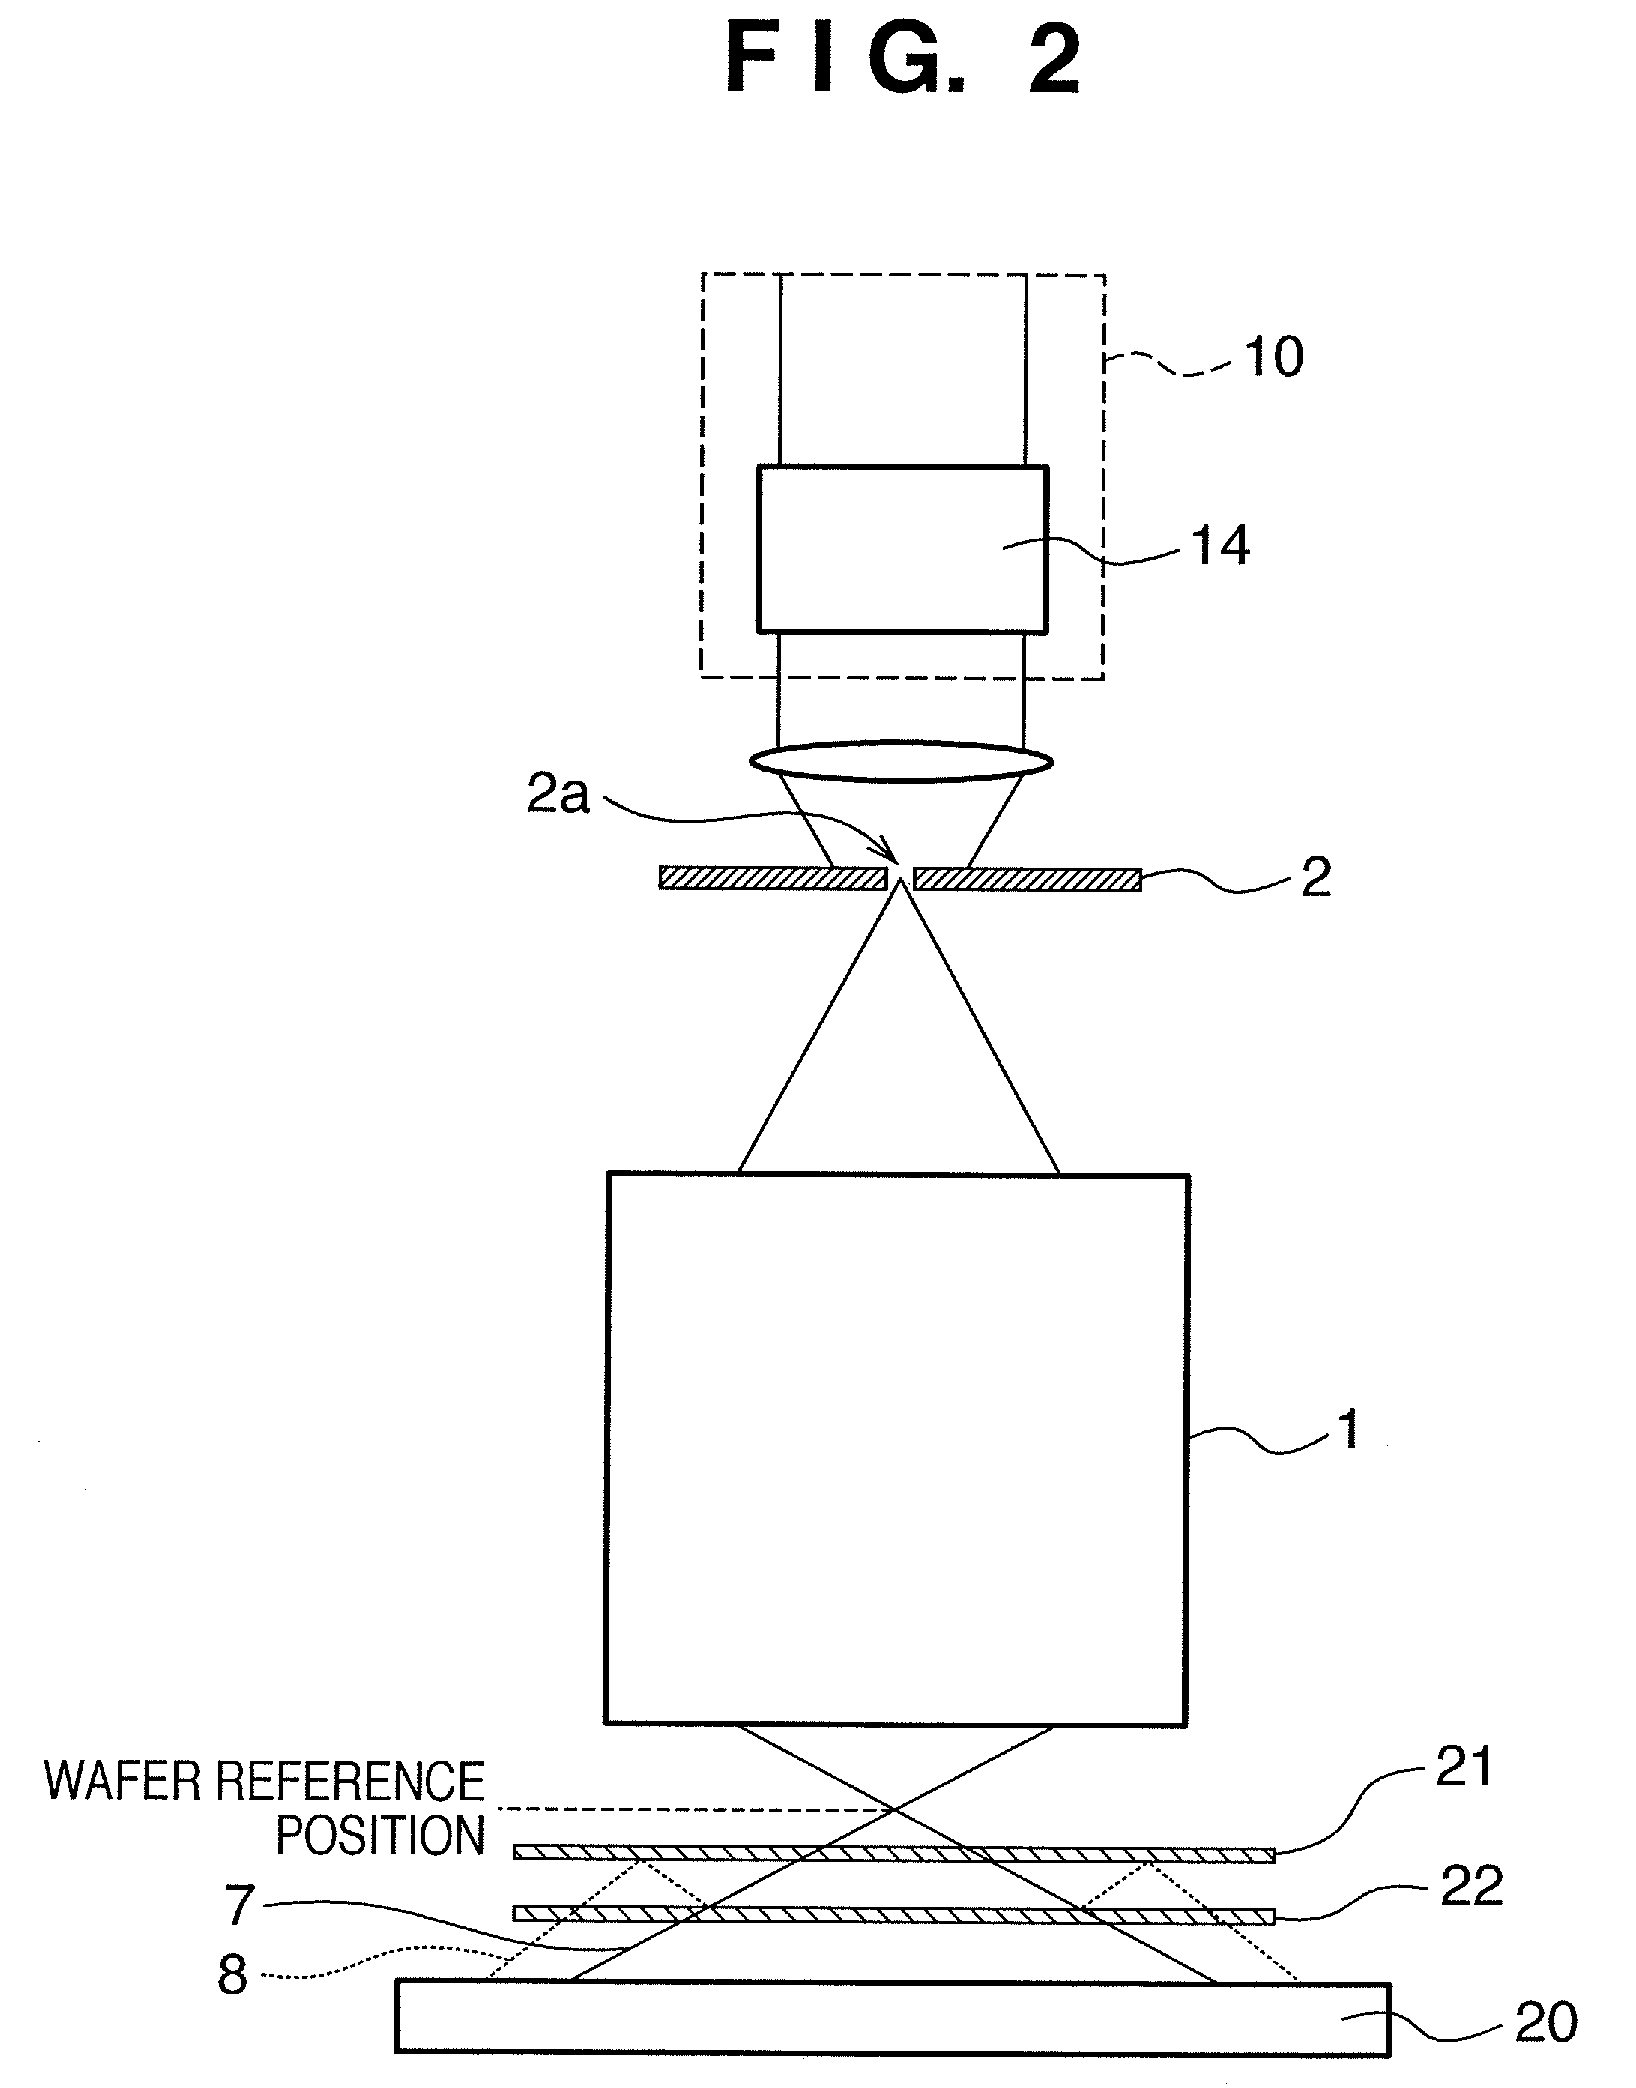 Exposure apparatus and device manufacturing method using a common path interferometer to form an interference pattern and a processor to calculate optical characteristics of projection optics using the interference pattern